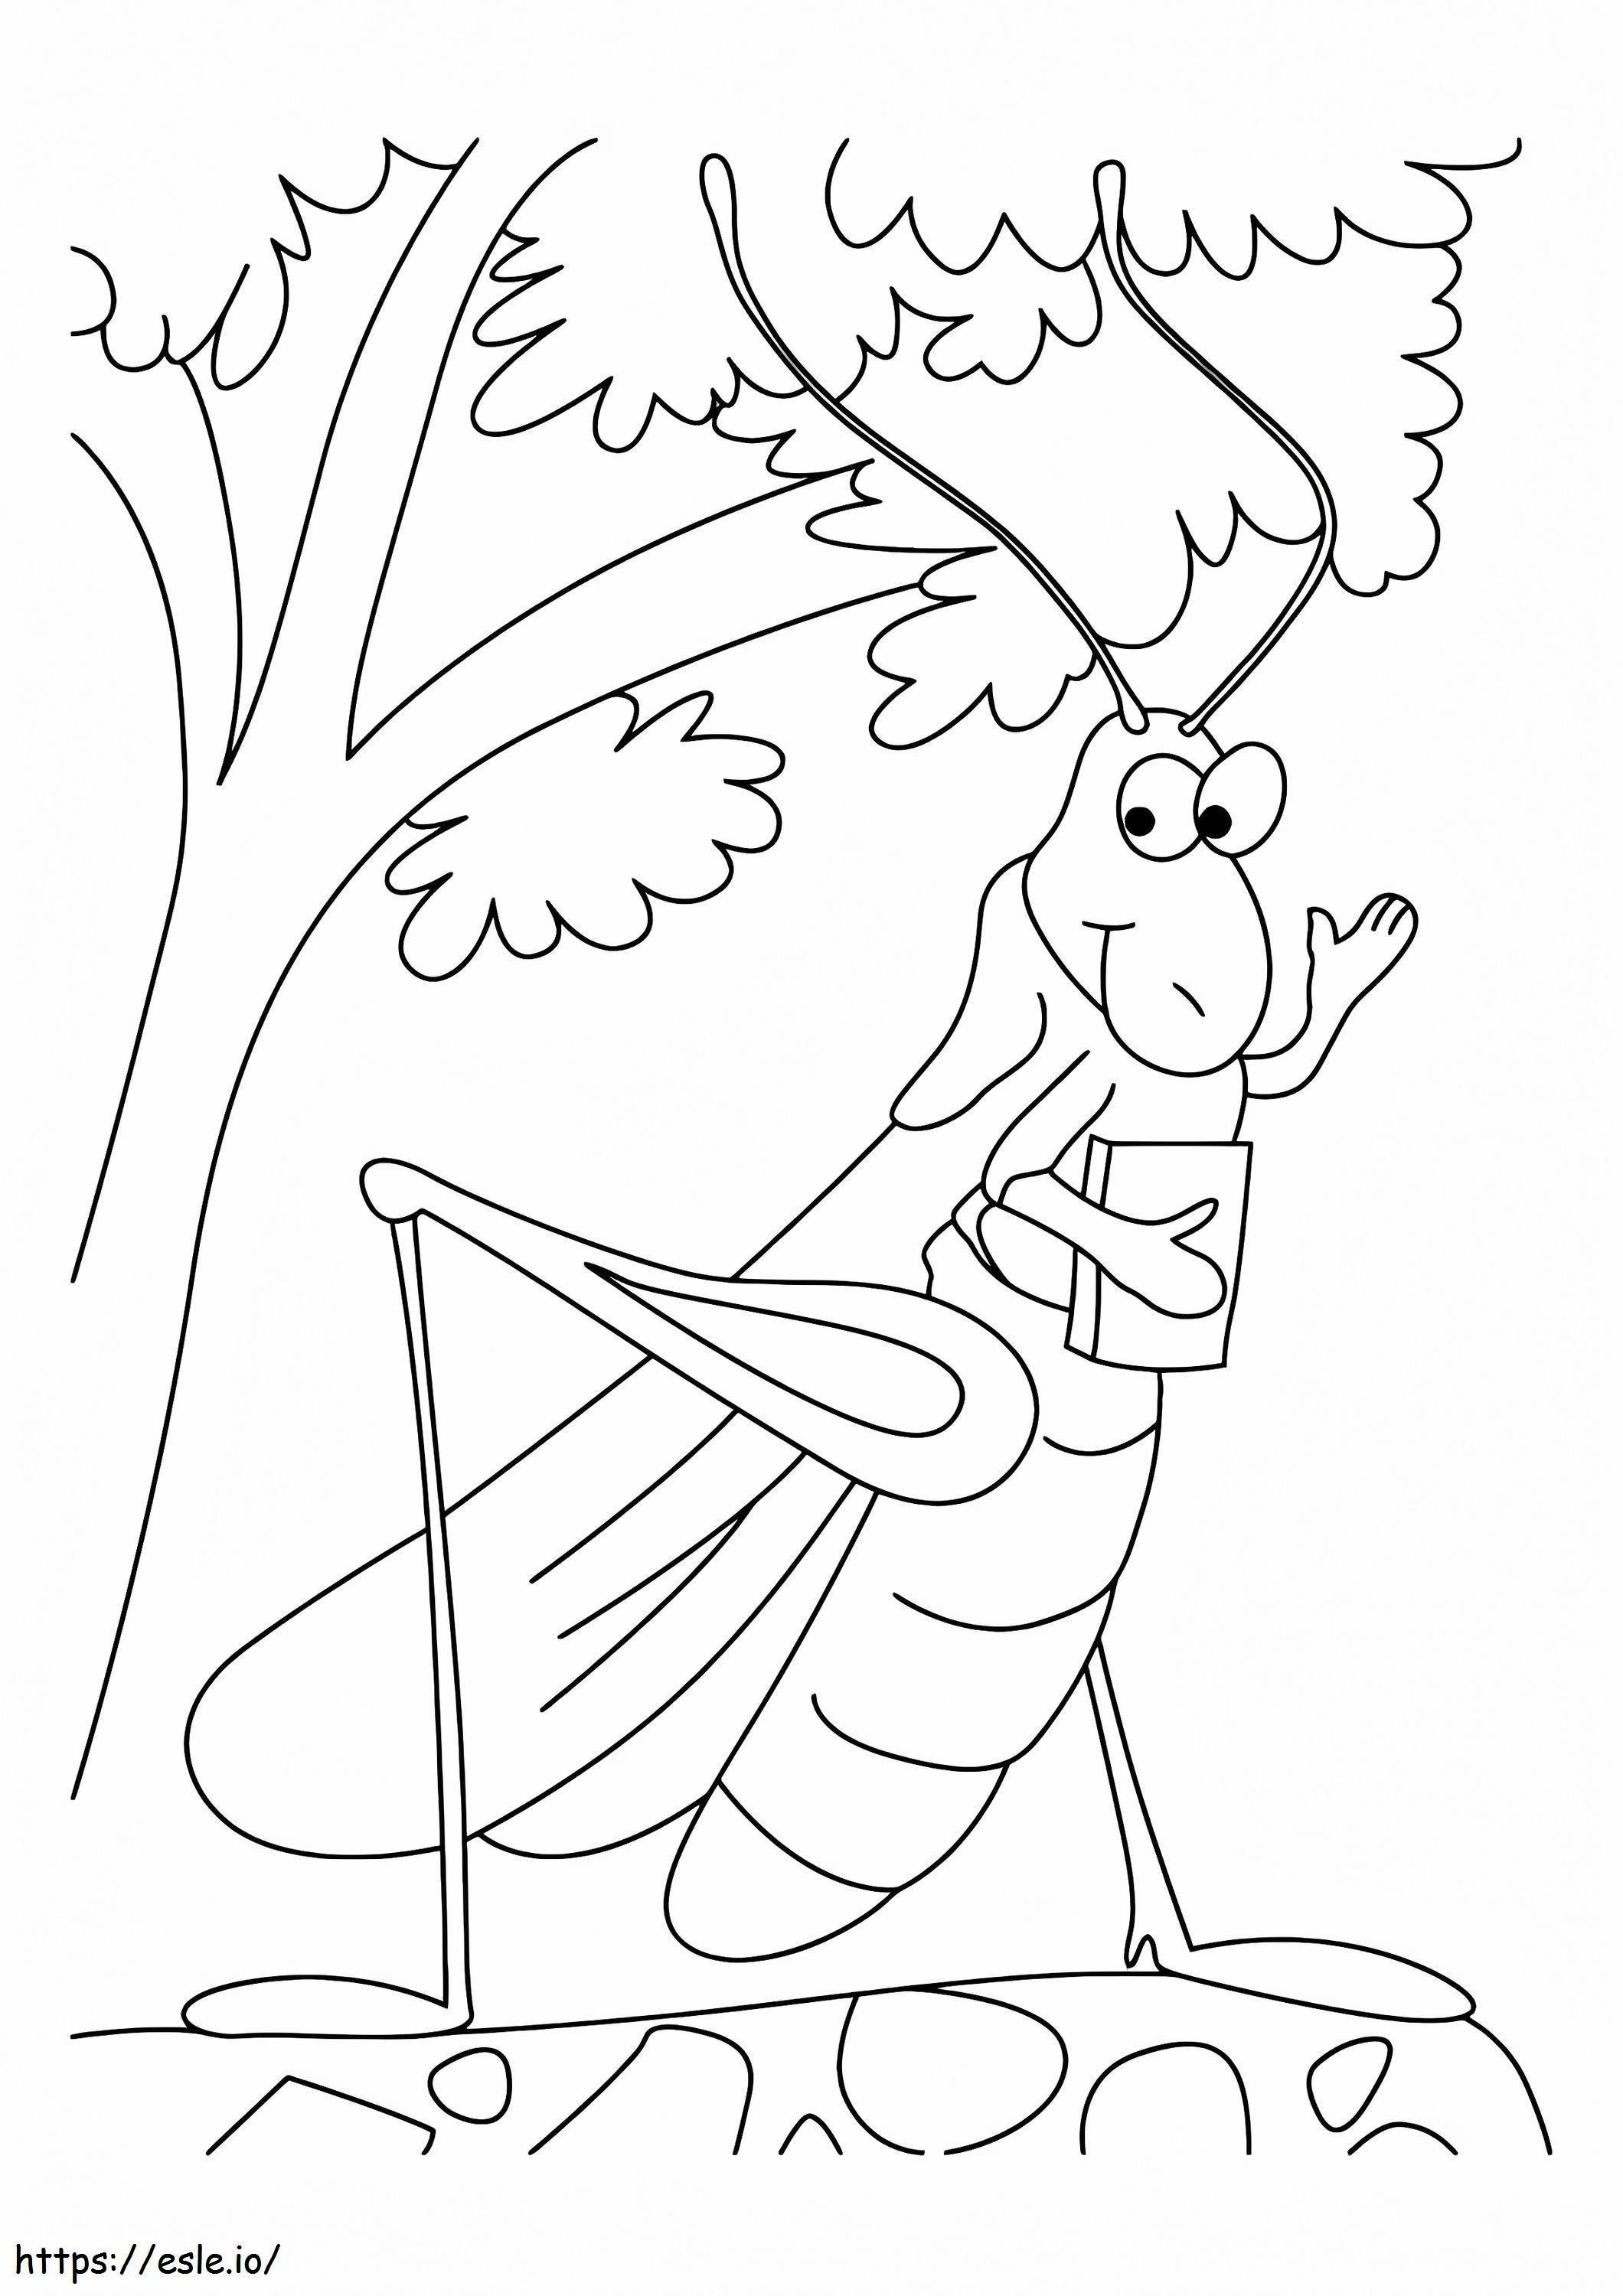 1526458336 Animated Grasshopper A4 coloring page